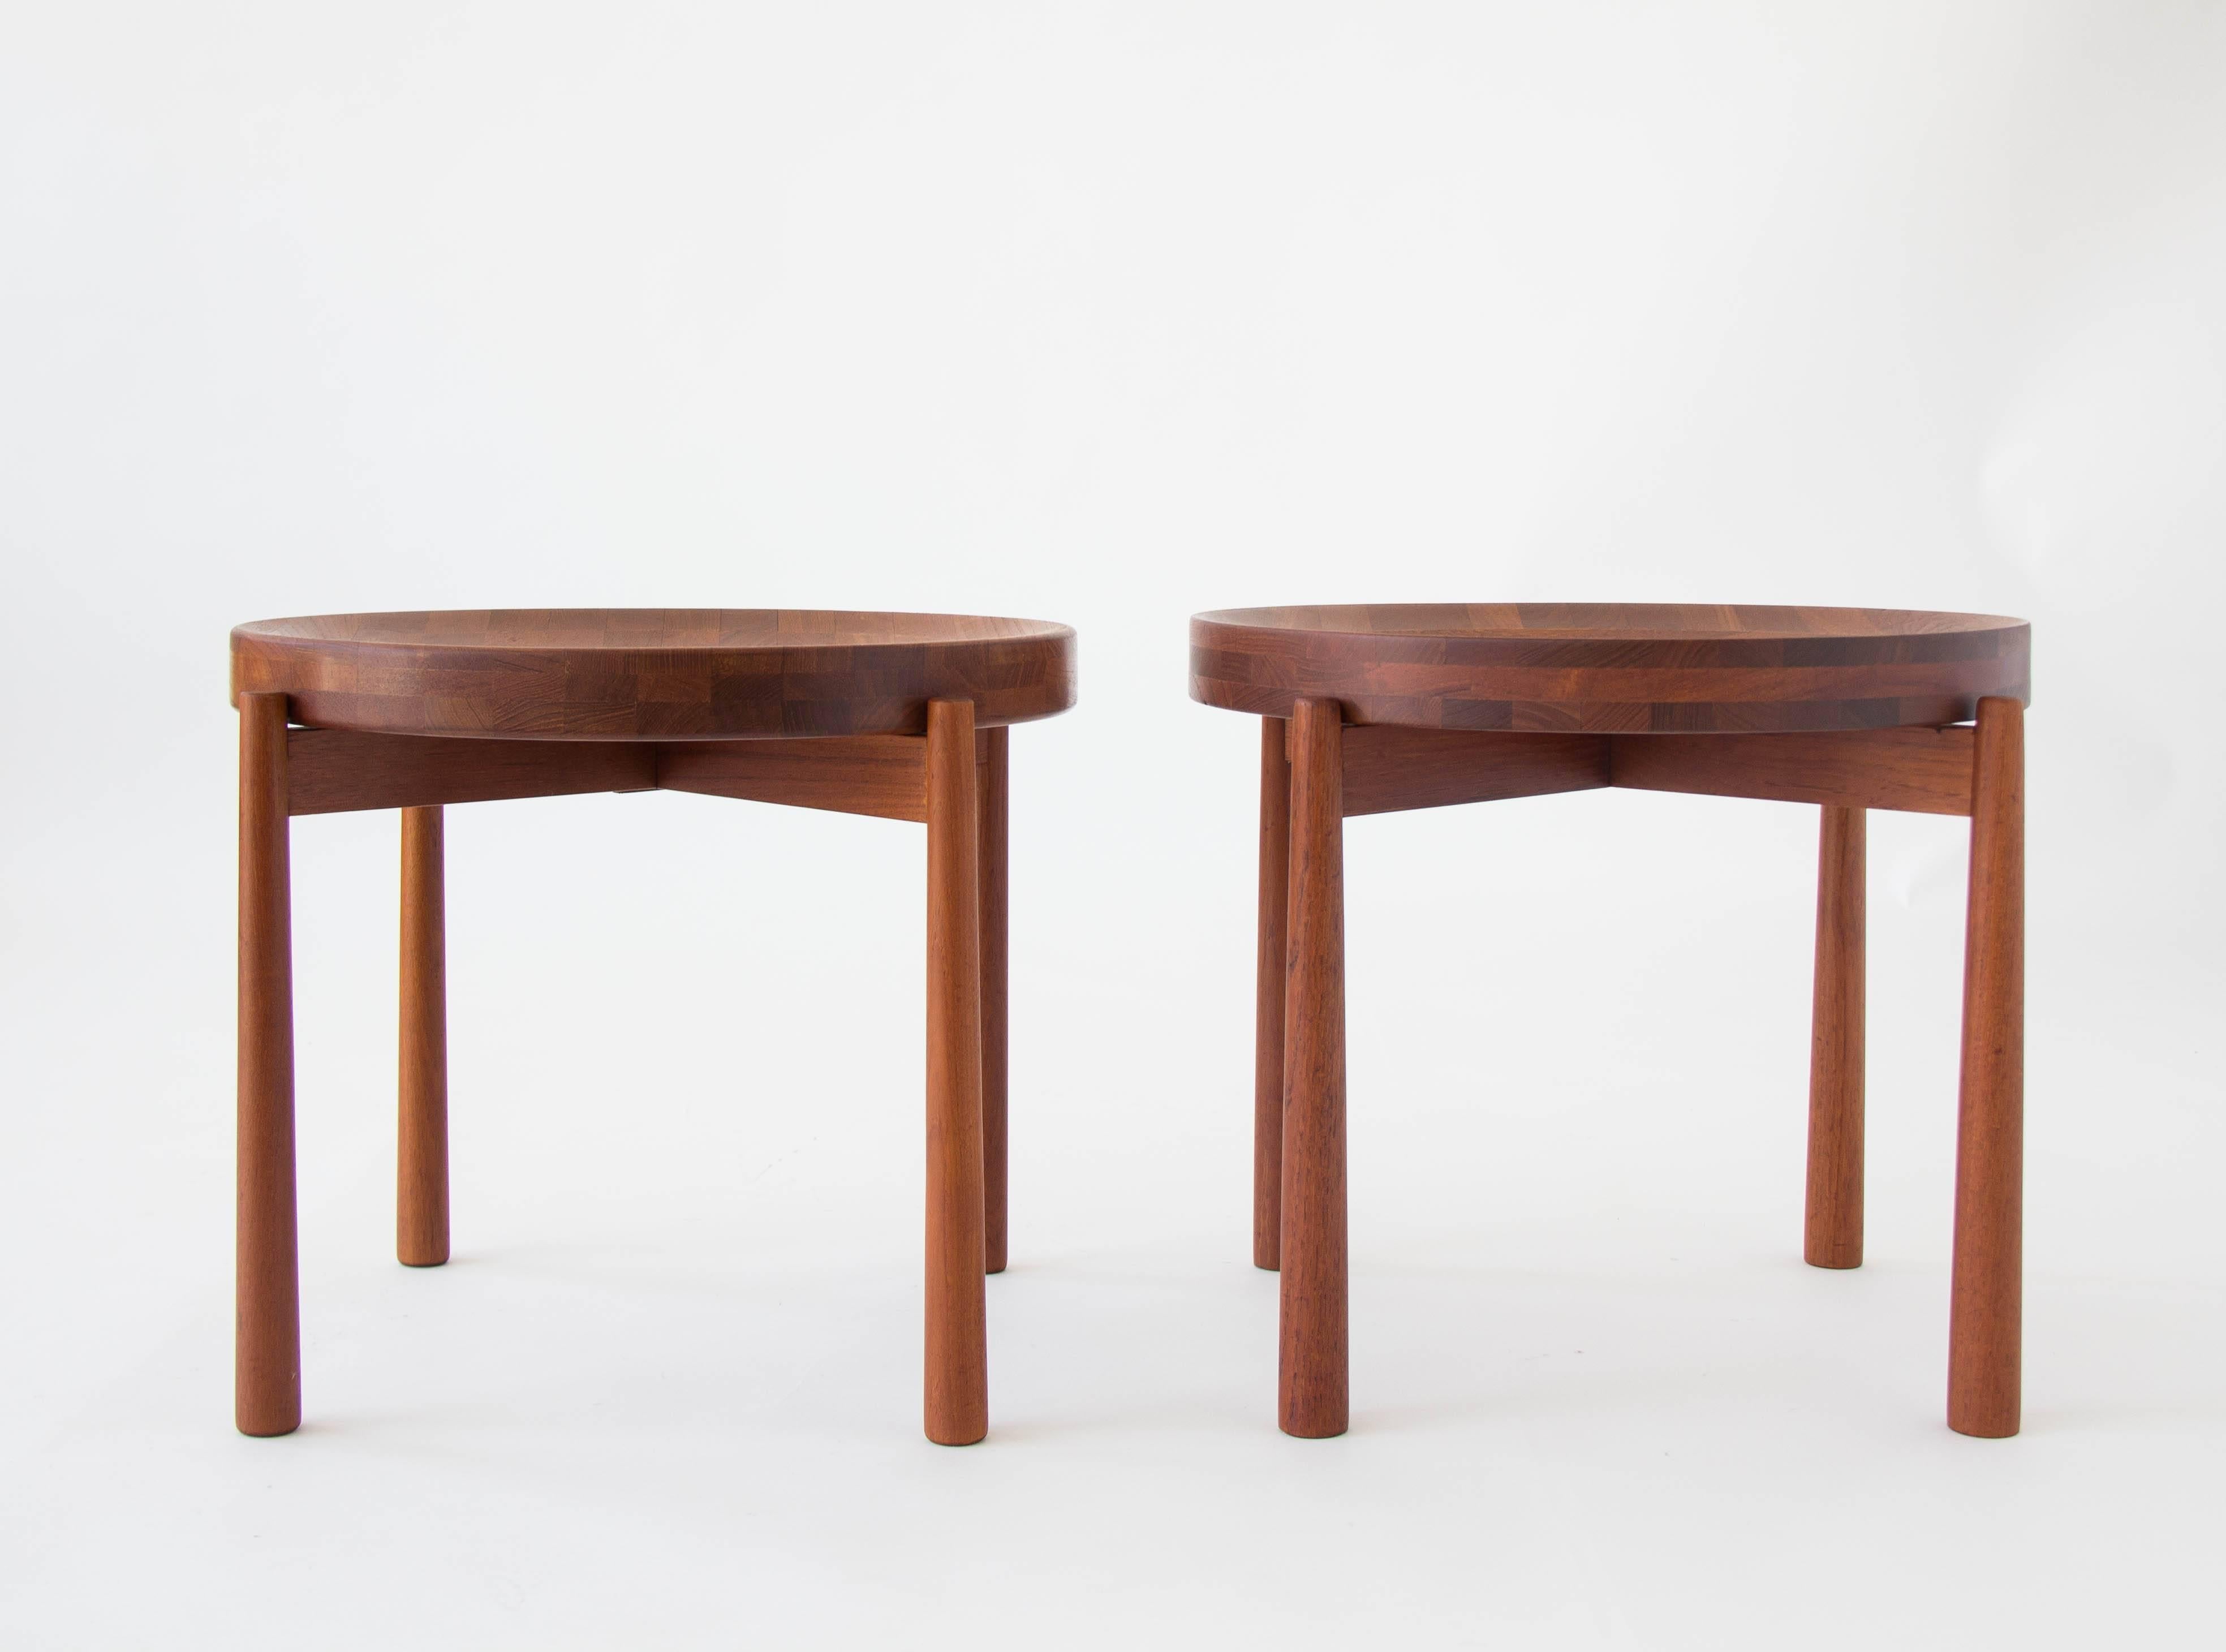 A pair of unique teak side tables. The fully finished top is flat on one side, and concave on the other, and can be removed and flipped according to use. The table stands on four flared legs. Concave surface has a beautiful checkered pattern of